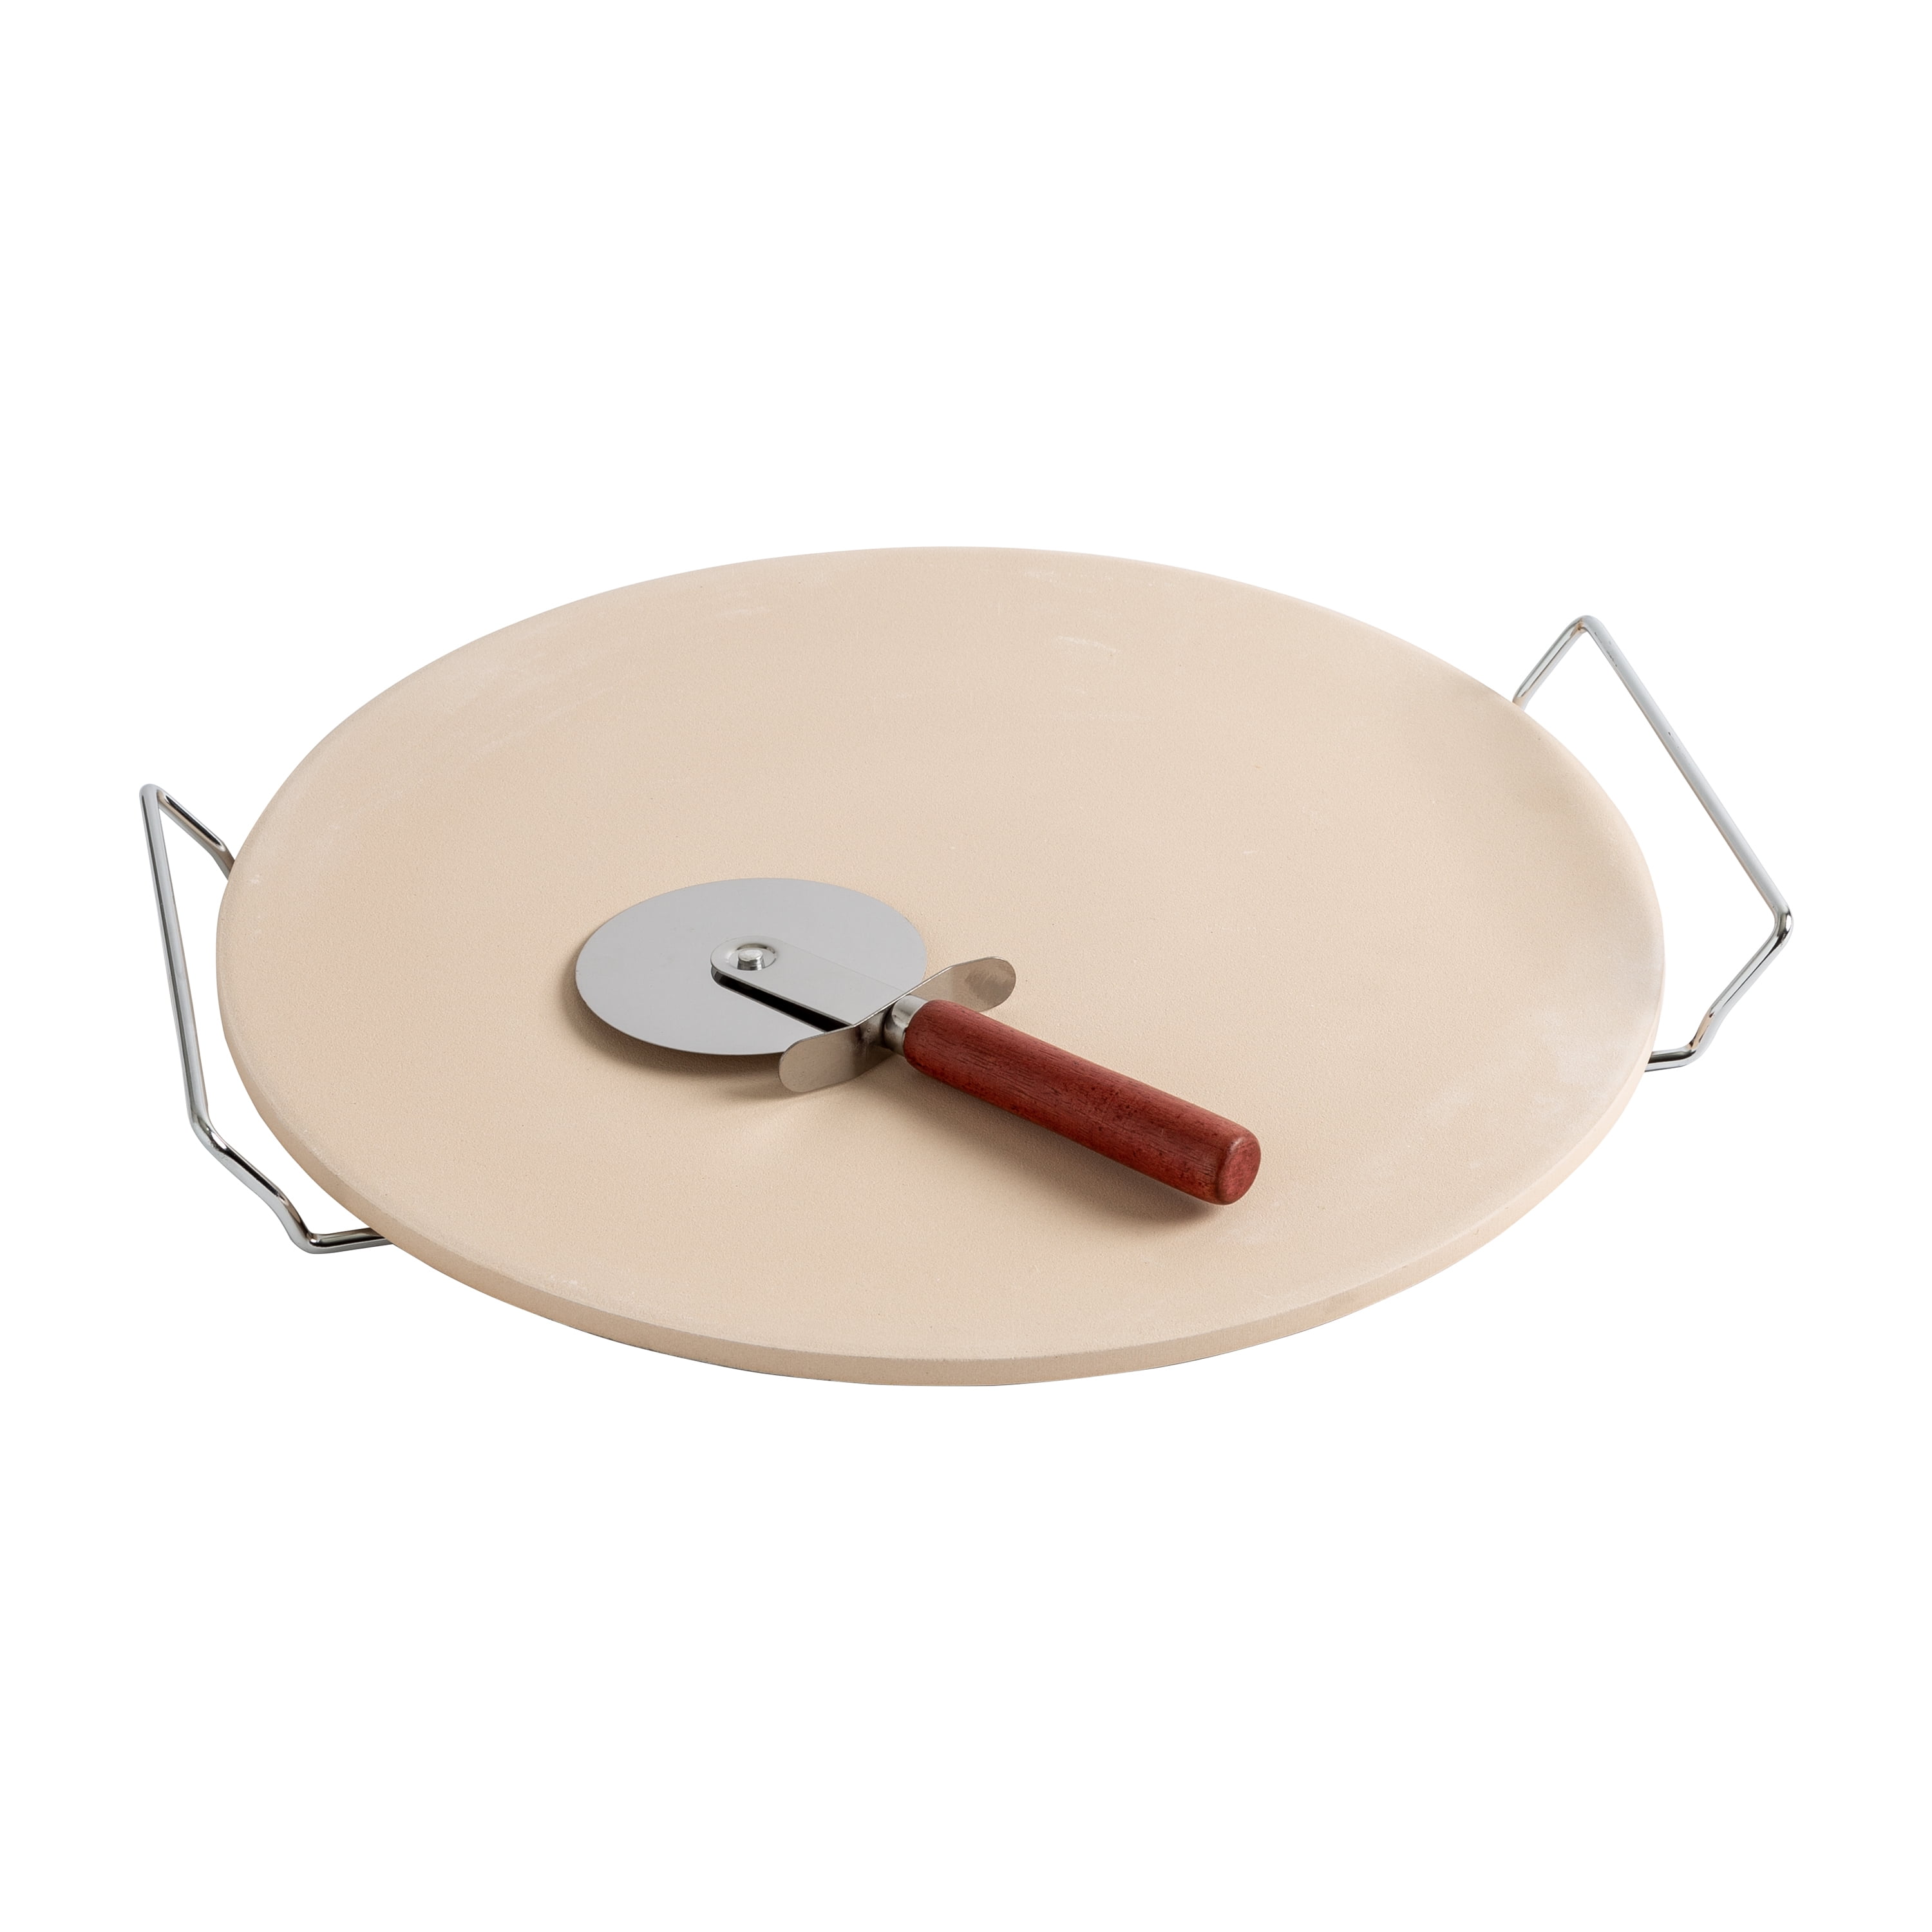 15” Pizza Baking Stone With Wire Serving Rack & Pizza Cutter Extra Large 38cm